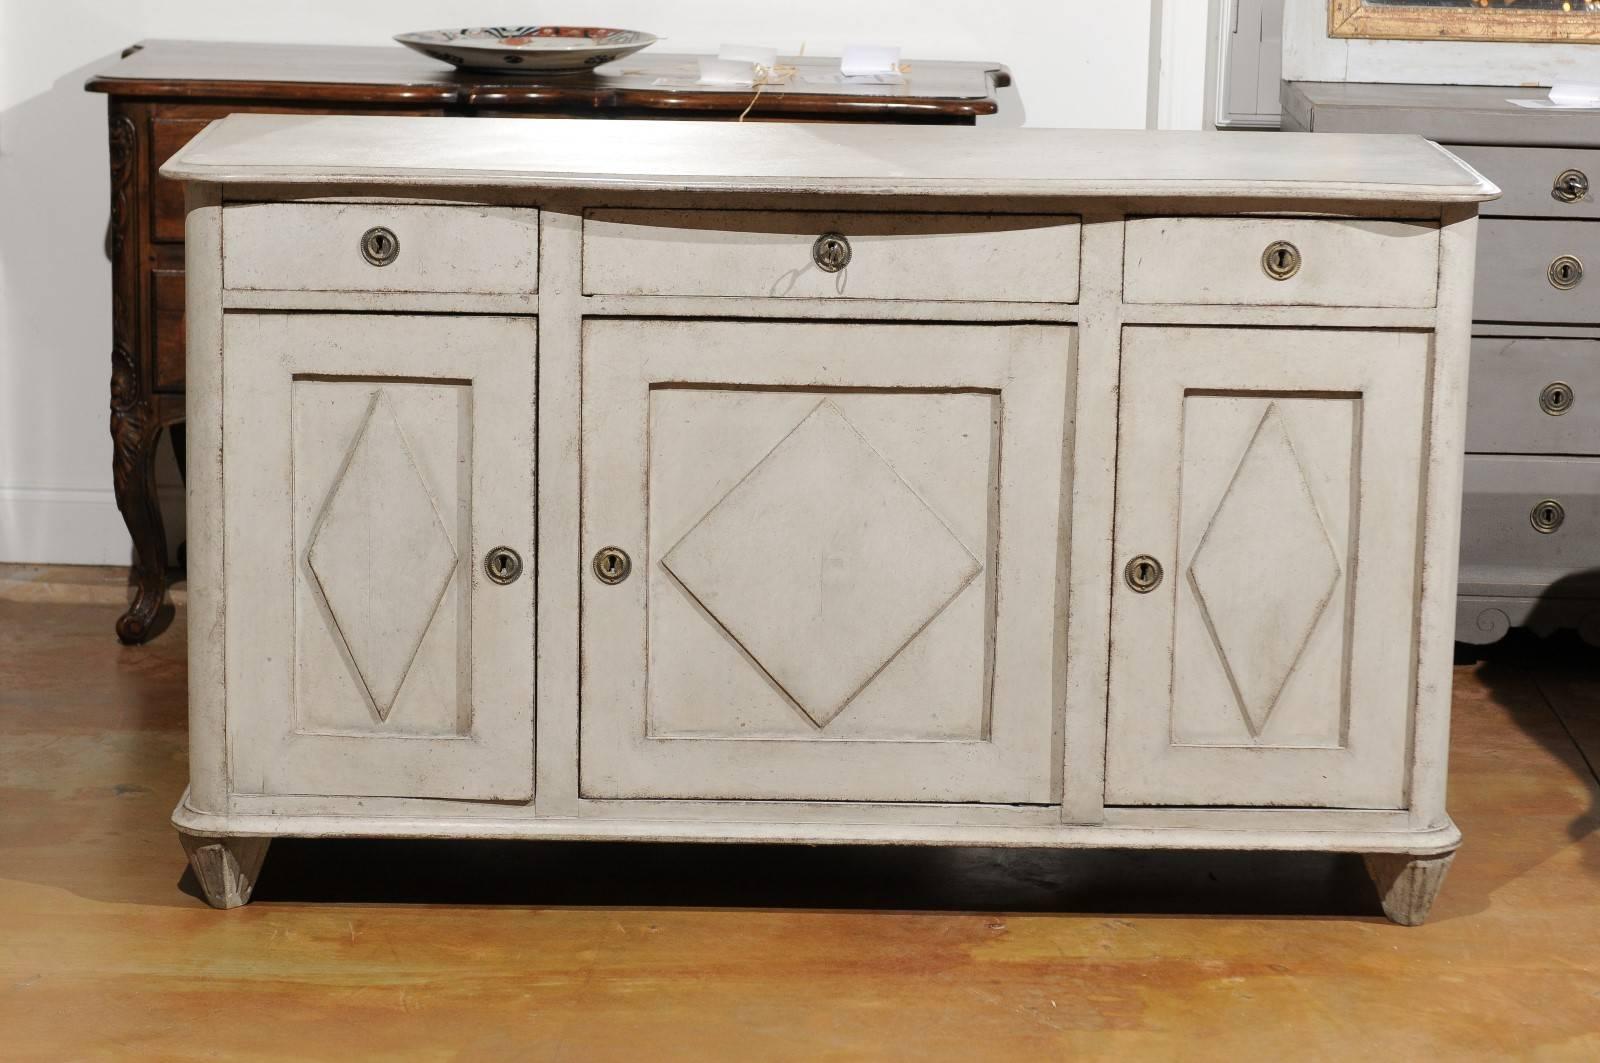 A Swedish Gustavian Style painted wood enfilade with three drawers over three doors from the mid-19th century. This Swedish long enfilade features a serpentine top sitting above three drawers and three doors. Each door is beautifully adorned with a